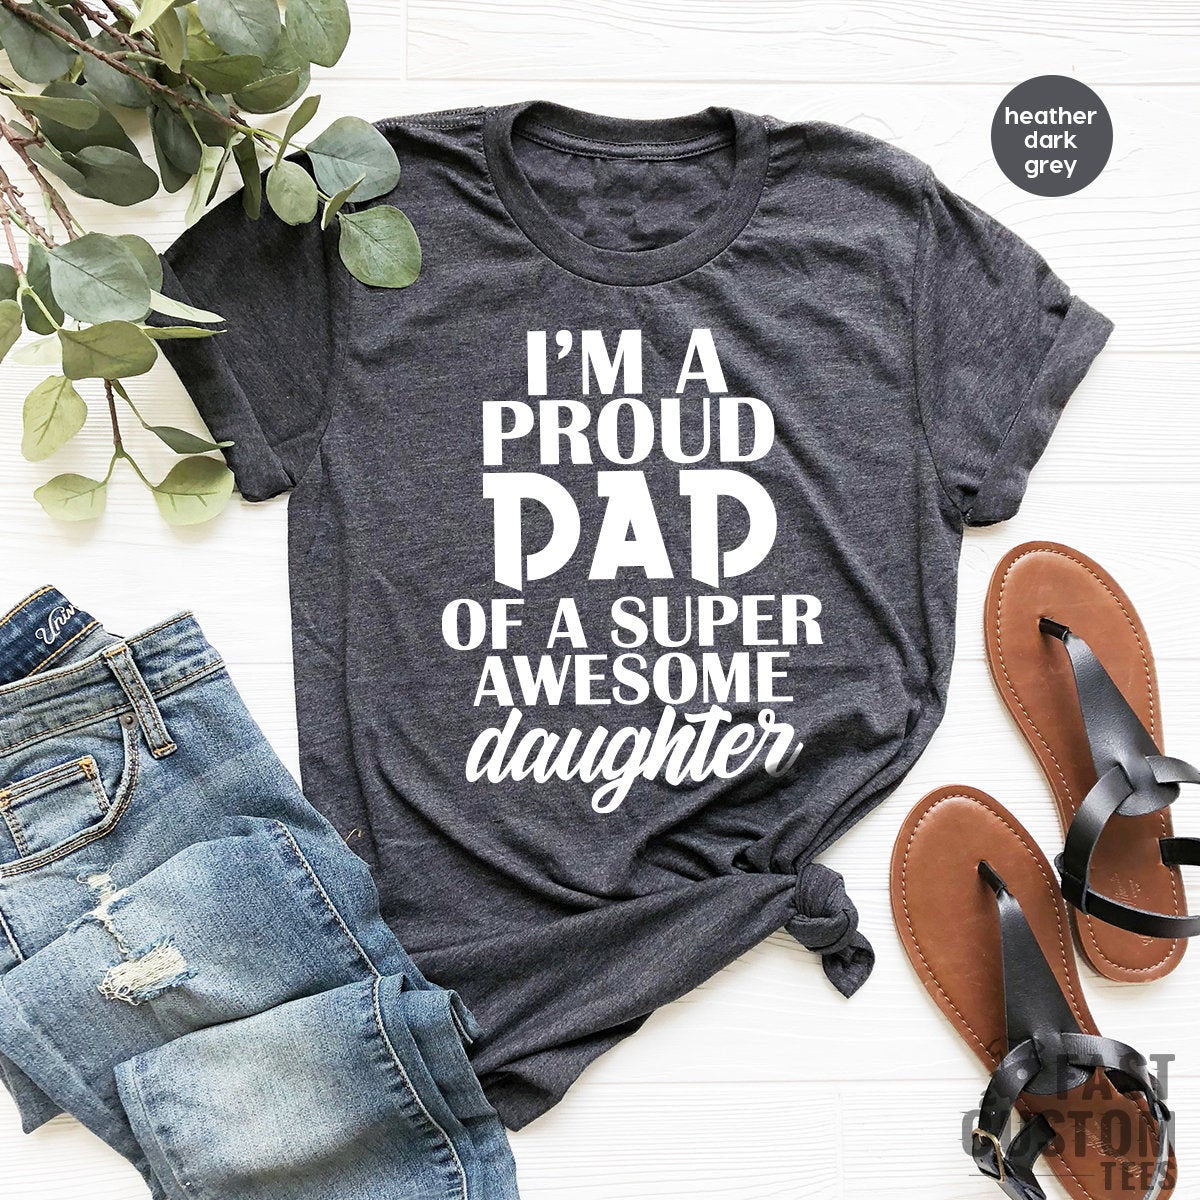 Dad T Shirt, Gift For Dad, Father's Day Shirt, Best Father Shirt, I'm Proud Dad Of A Super Awesome Daughter Tee, Daddy TShirt, Dad Gift - Fastdeliverytees.com